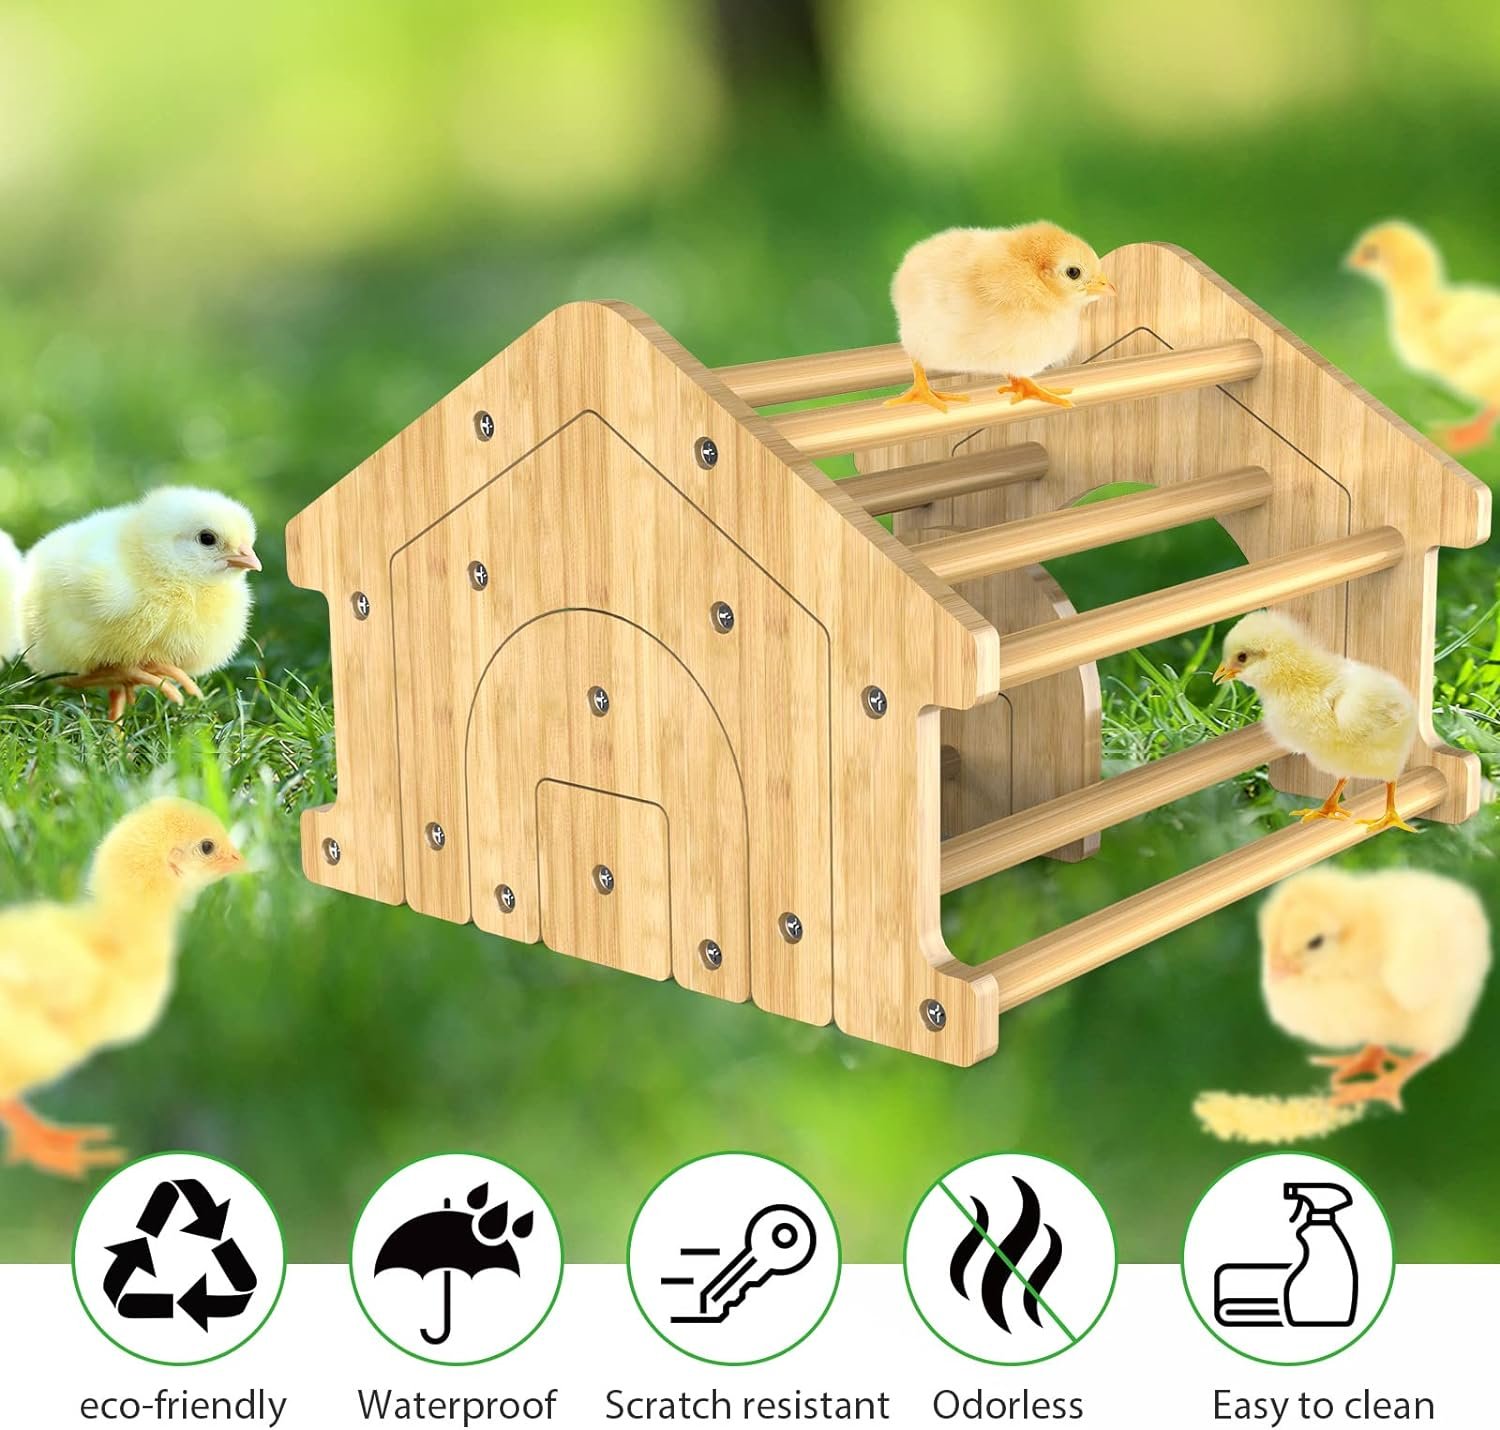 Ensayeer Bamboo Chicken Perch with Mirror, Strong Roosting Bar for coop and brooder, Training Perch for Large Bird, Hens, Parrots, Macaw, Easy to Assemble and Clean, Fun Toys for Chicken